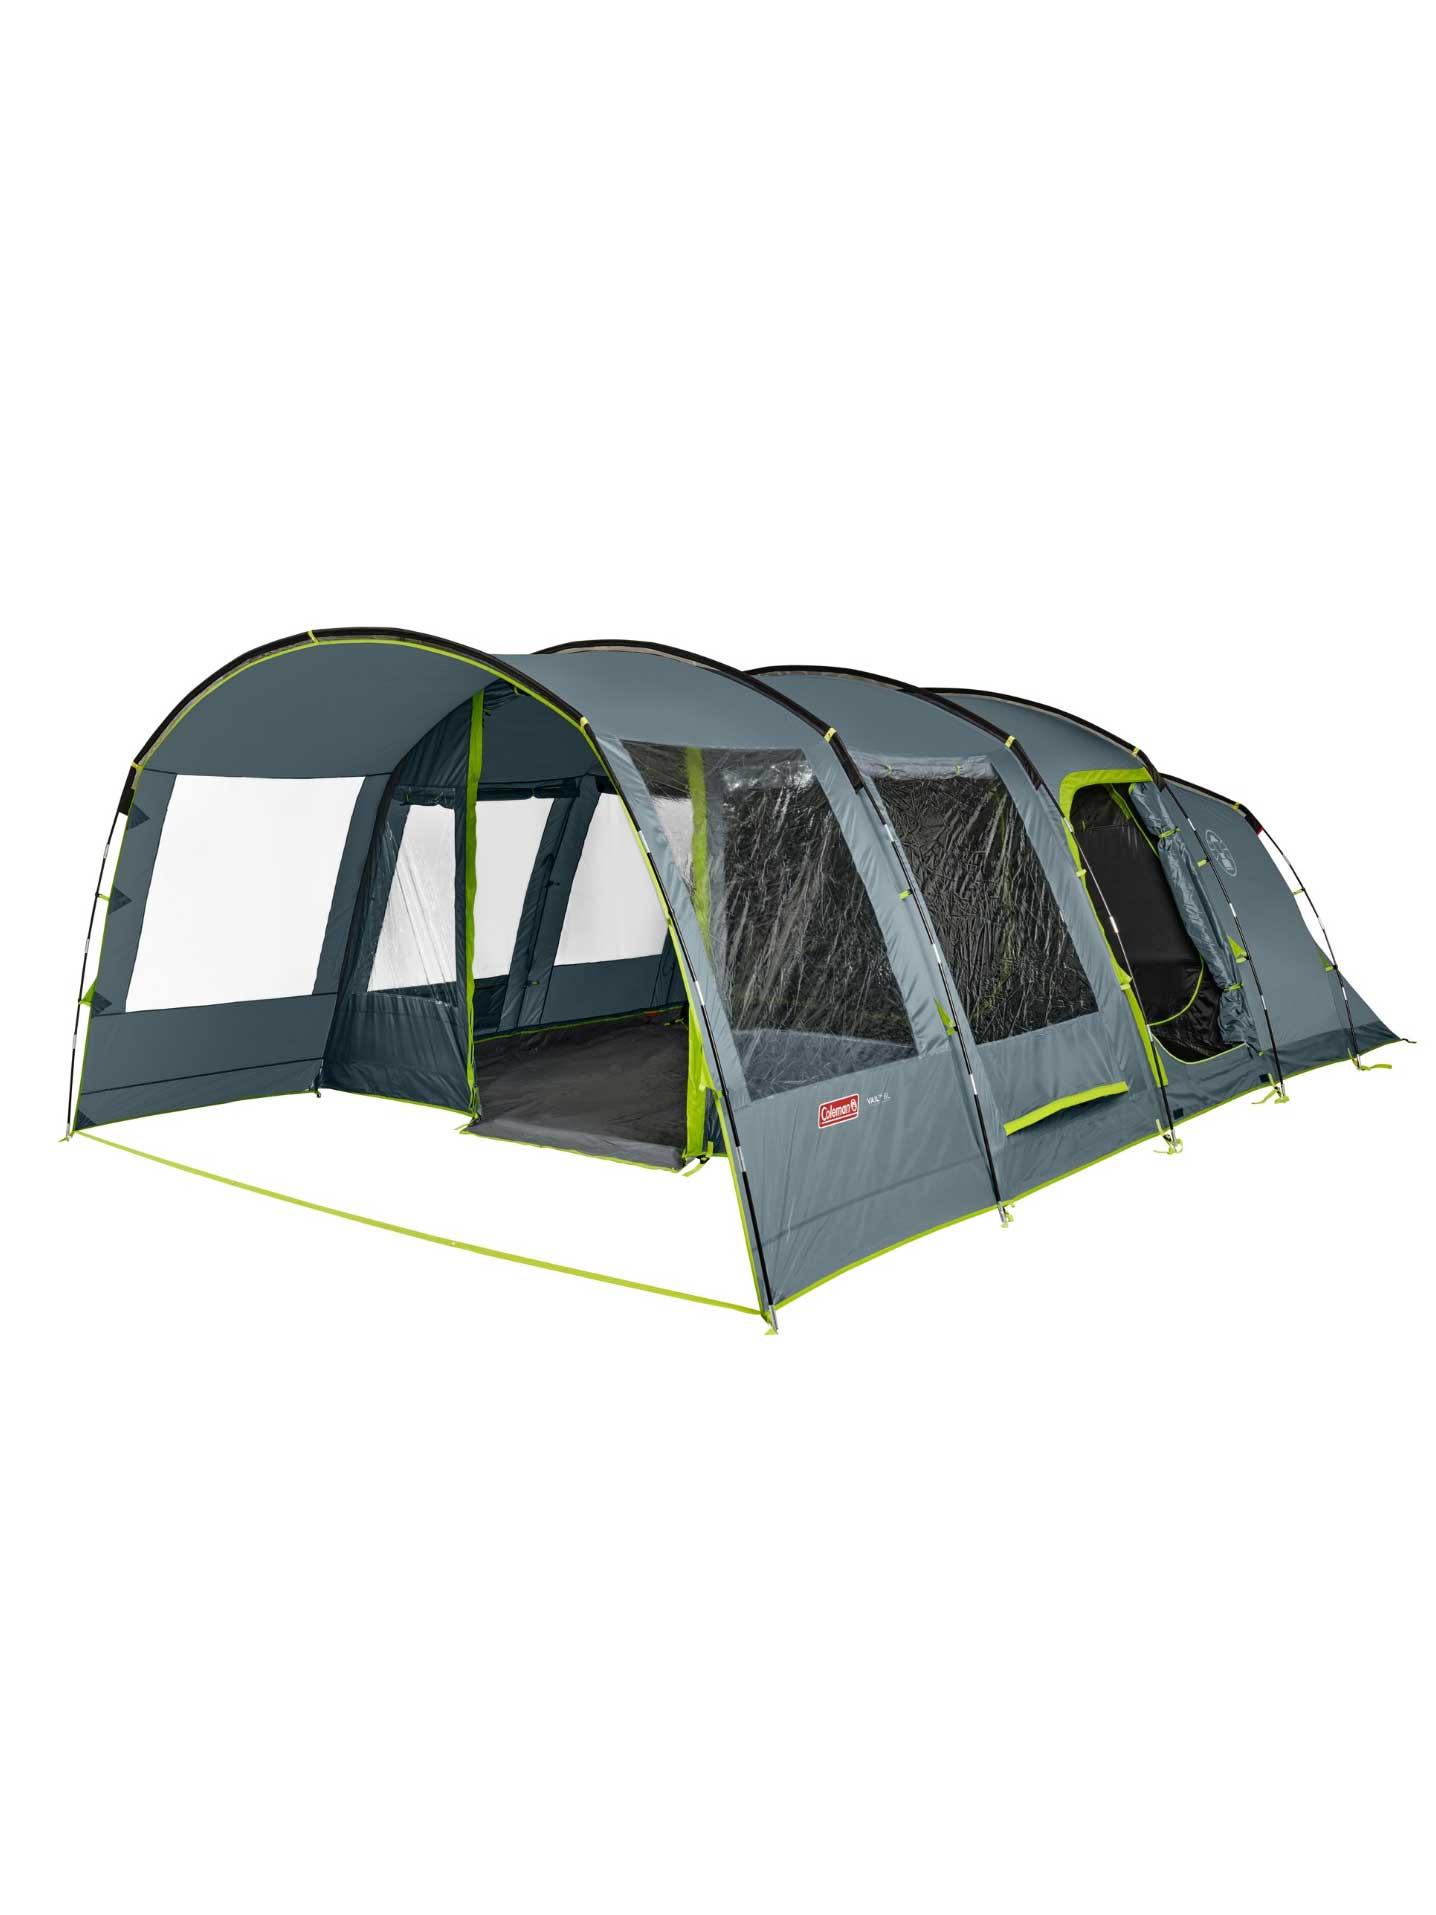 Selected image for COLEMAN Šator Vail 6 Long Tent siva